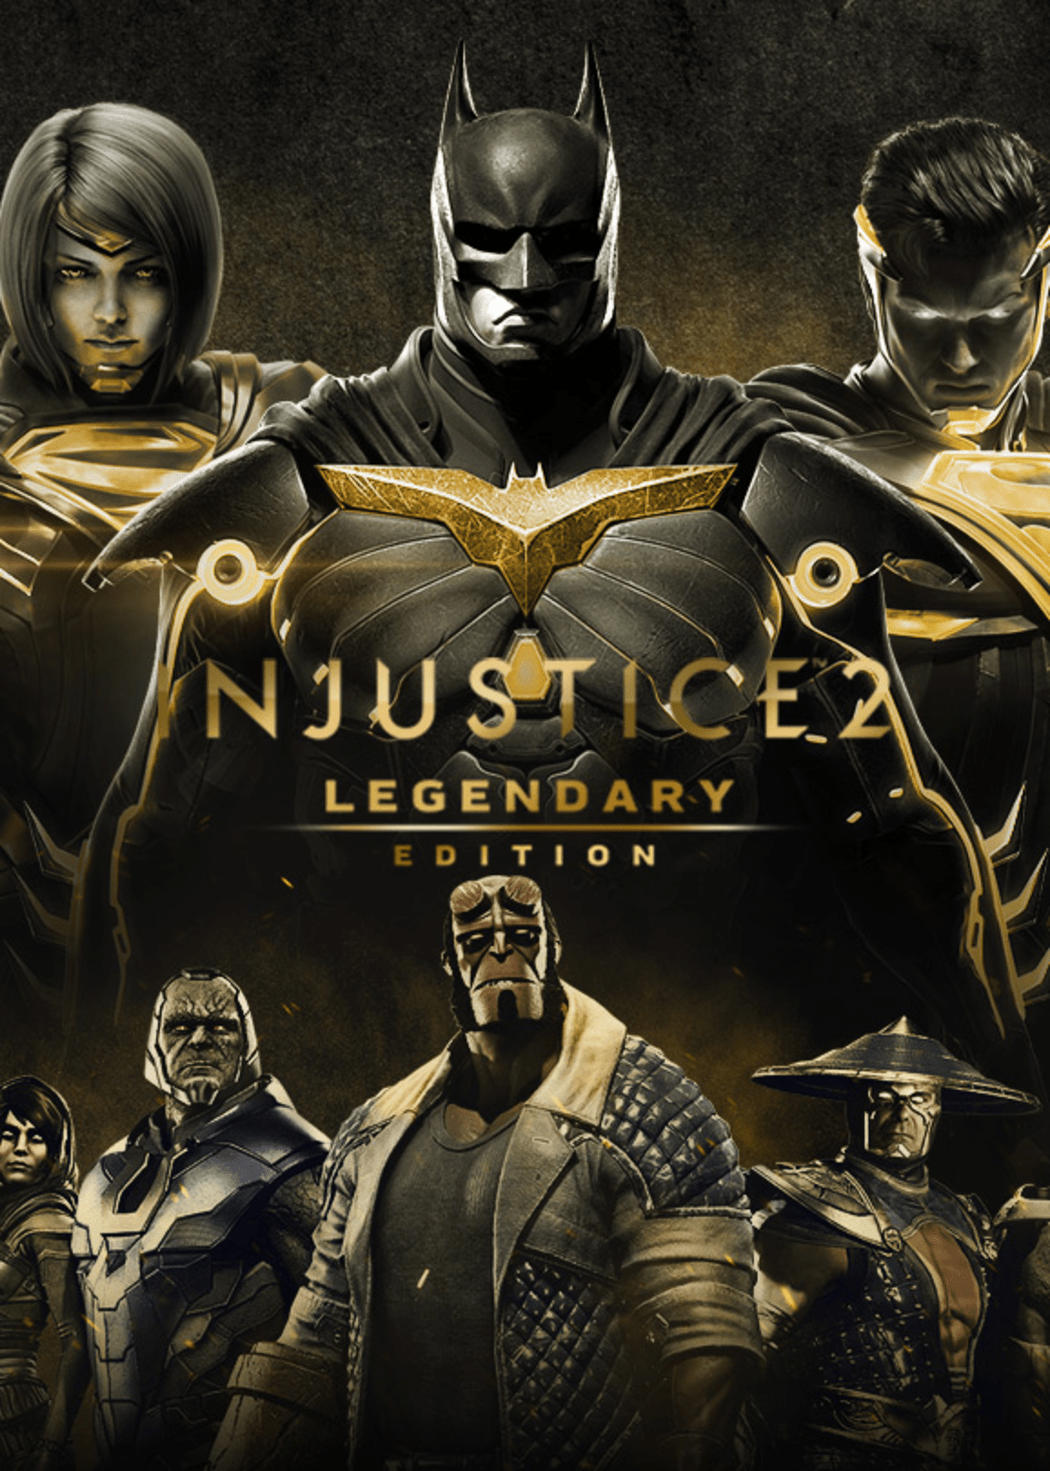 injustice 2 legendary edition characters